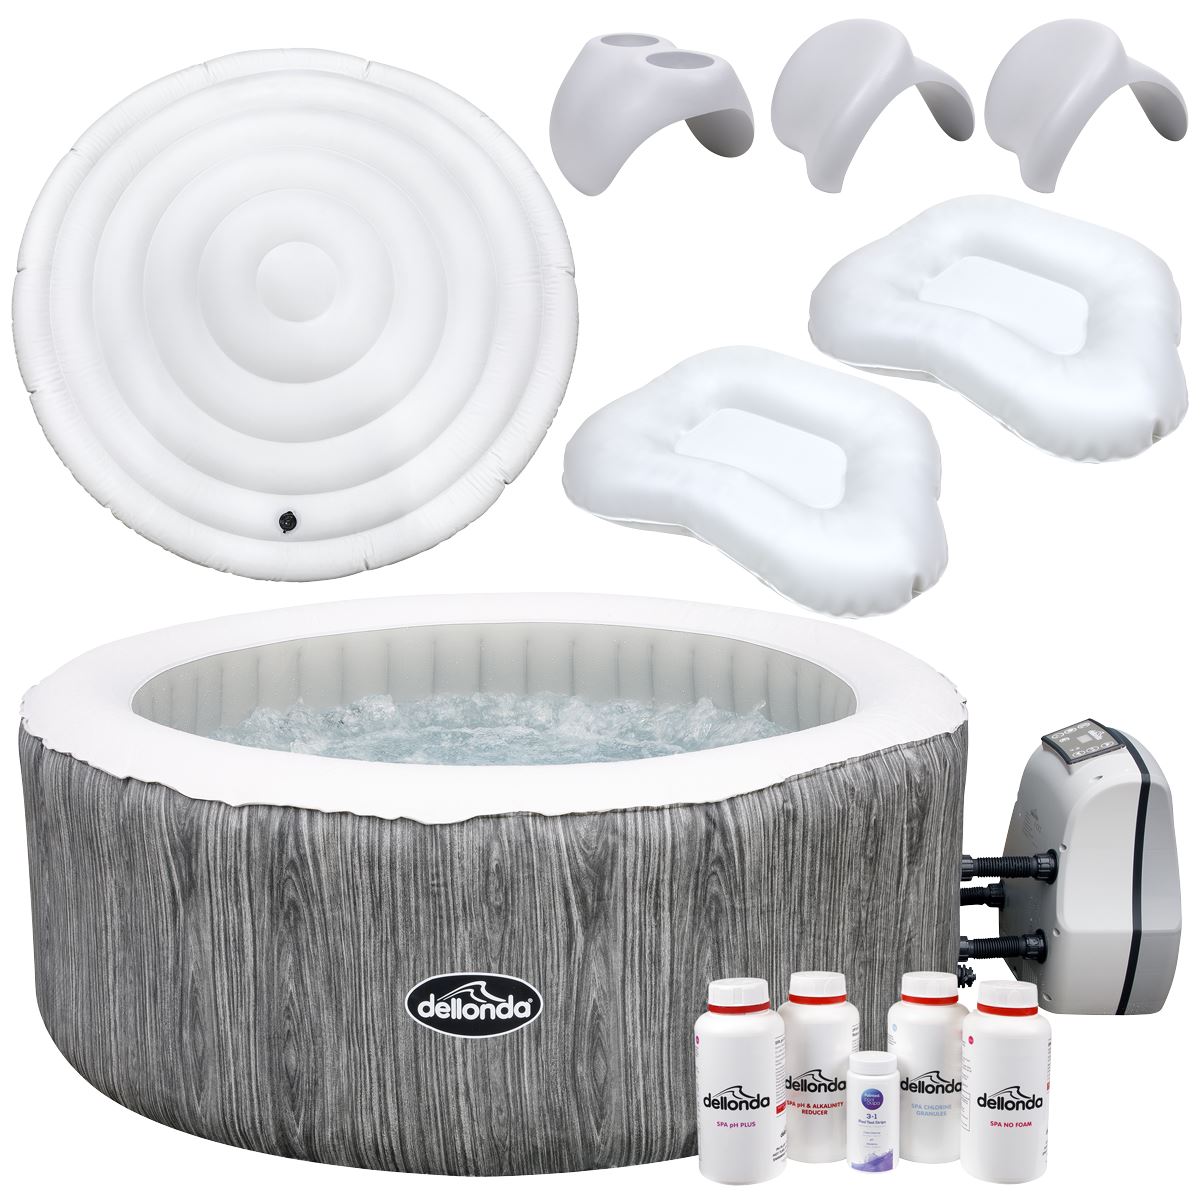 Dellonda 2-4 Person Inflatable Hot Tub Spa Starter Kit with Smart Pump - Wood Effect